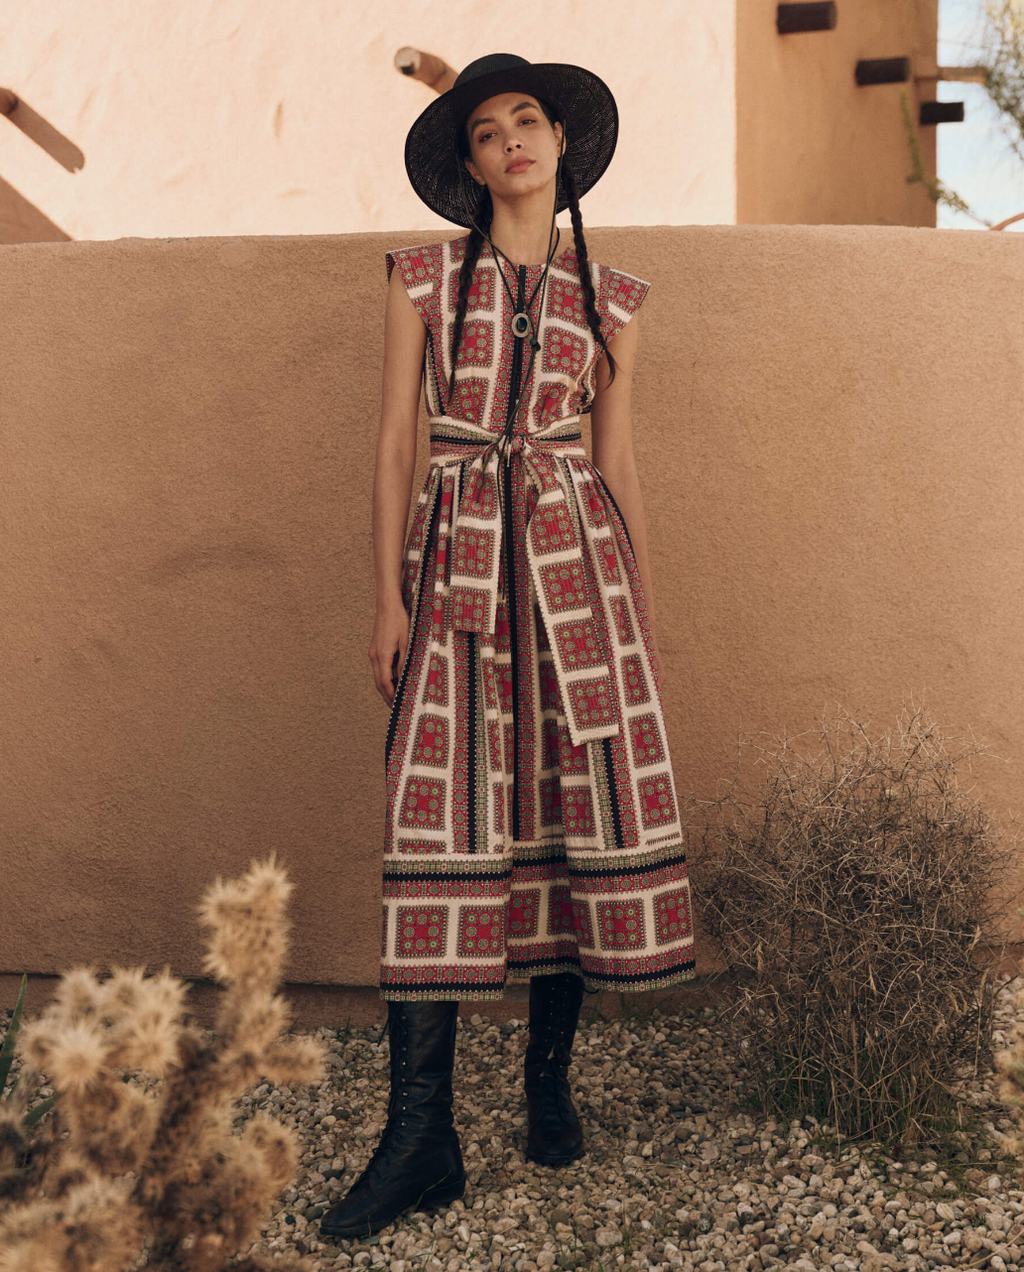 A woman in a desert setting wears a vintage-inspired print dress with a belt, paired with black lace-up boots and a wide-brimmed hat, conveying a rustic yet chic look.